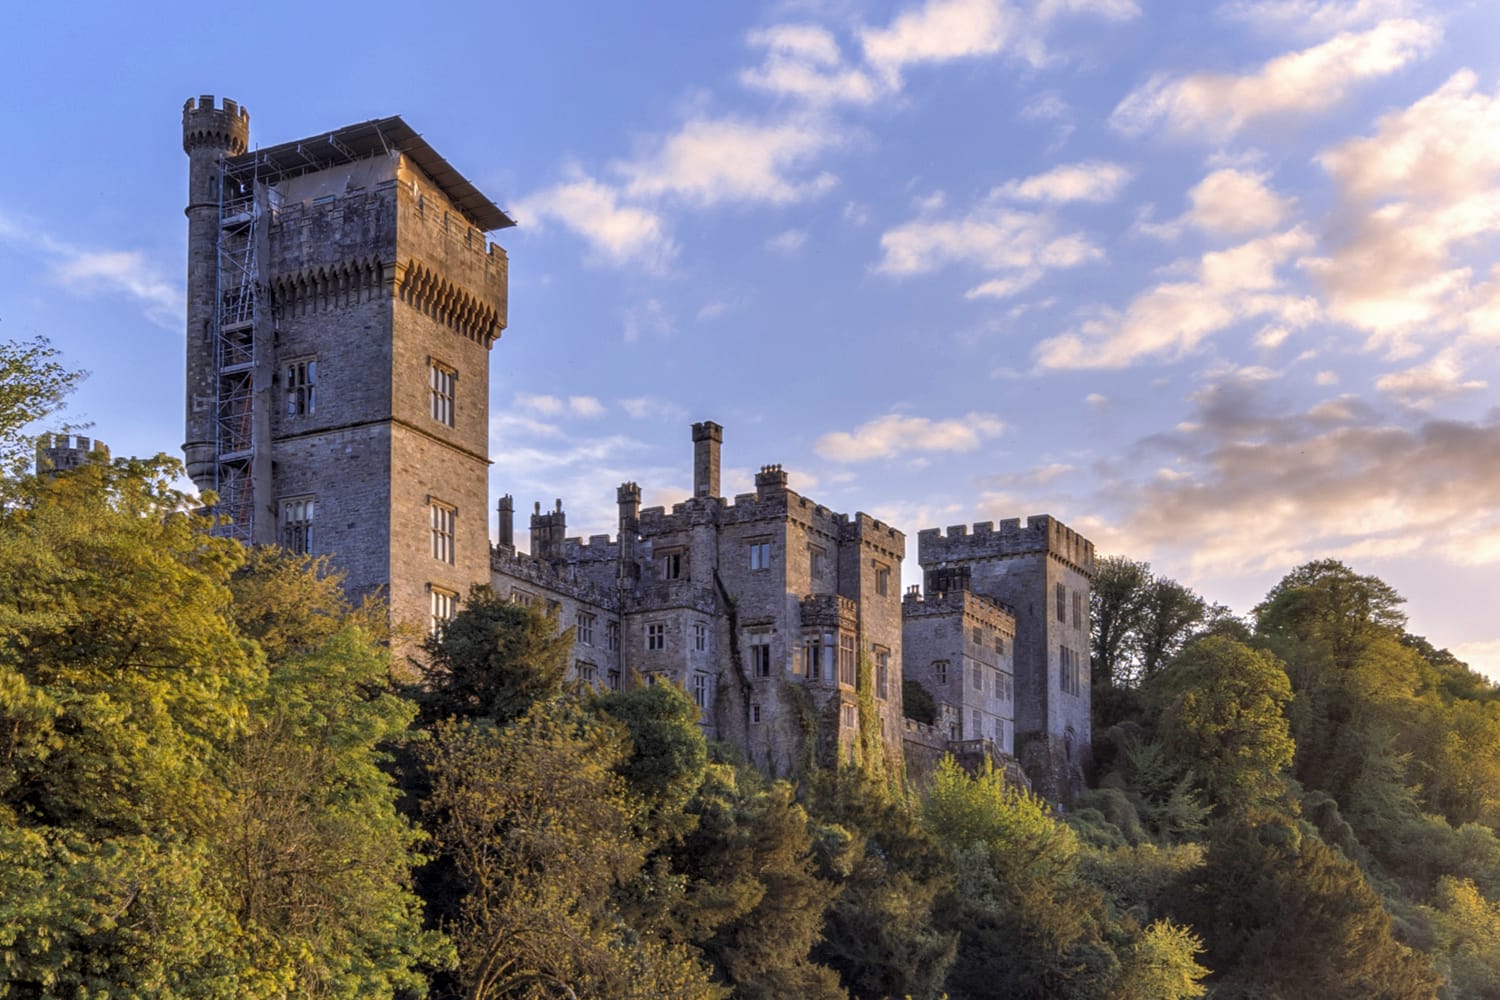 Lismore Castle in County Waterford, Ireland.